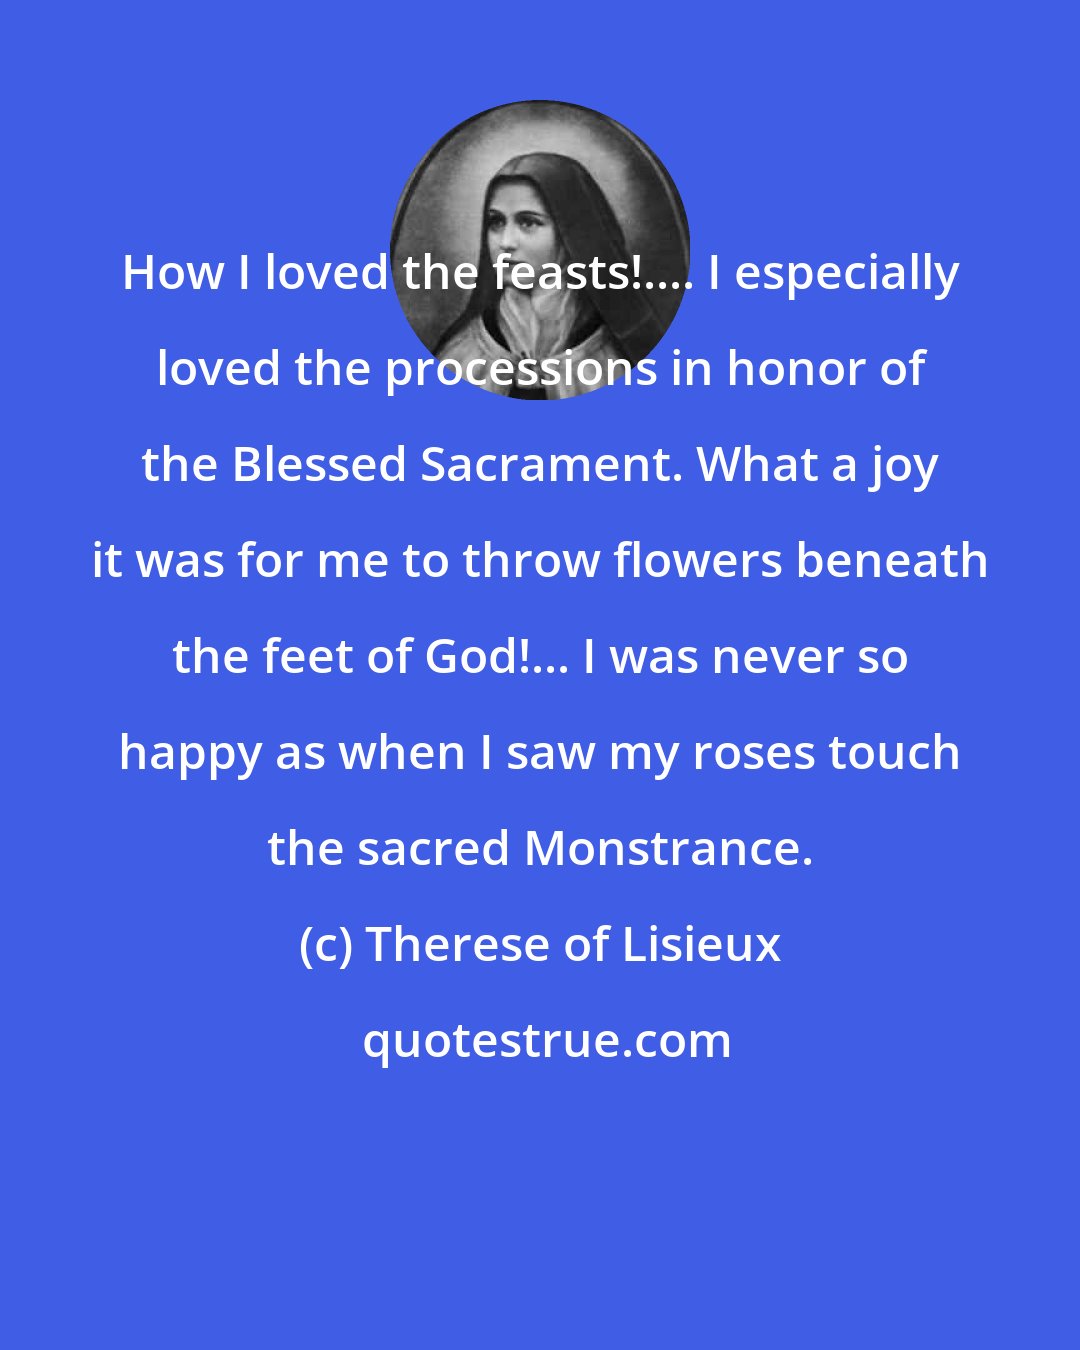 Therese of Lisieux: How I loved the feasts!.... I especially loved the processions in honor of the Blessed Sacrament. What a joy it was for me to throw flowers beneath the feet of God!... I was never so happy as when I saw my roses touch the sacred Monstrance.